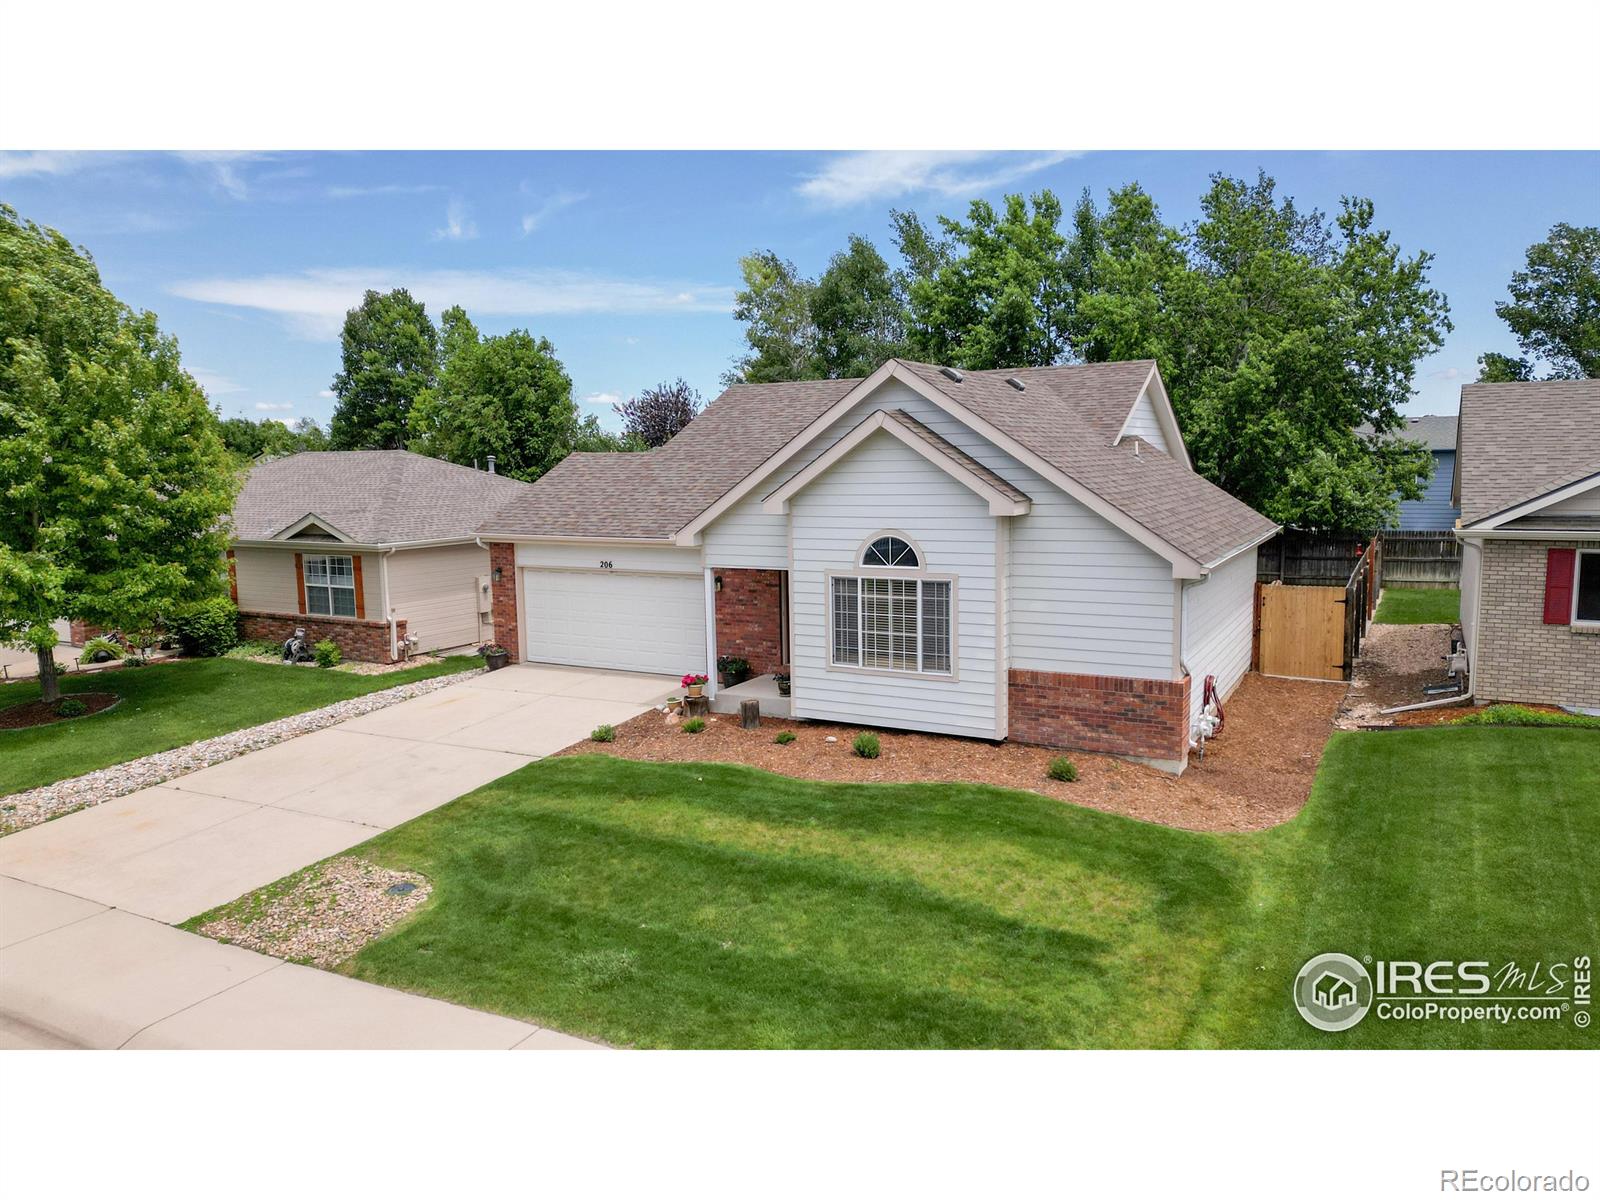 206  51st Avenue, greeley MLS: 123456789991014 Beds: 3 Baths: 2 Price: $427,000